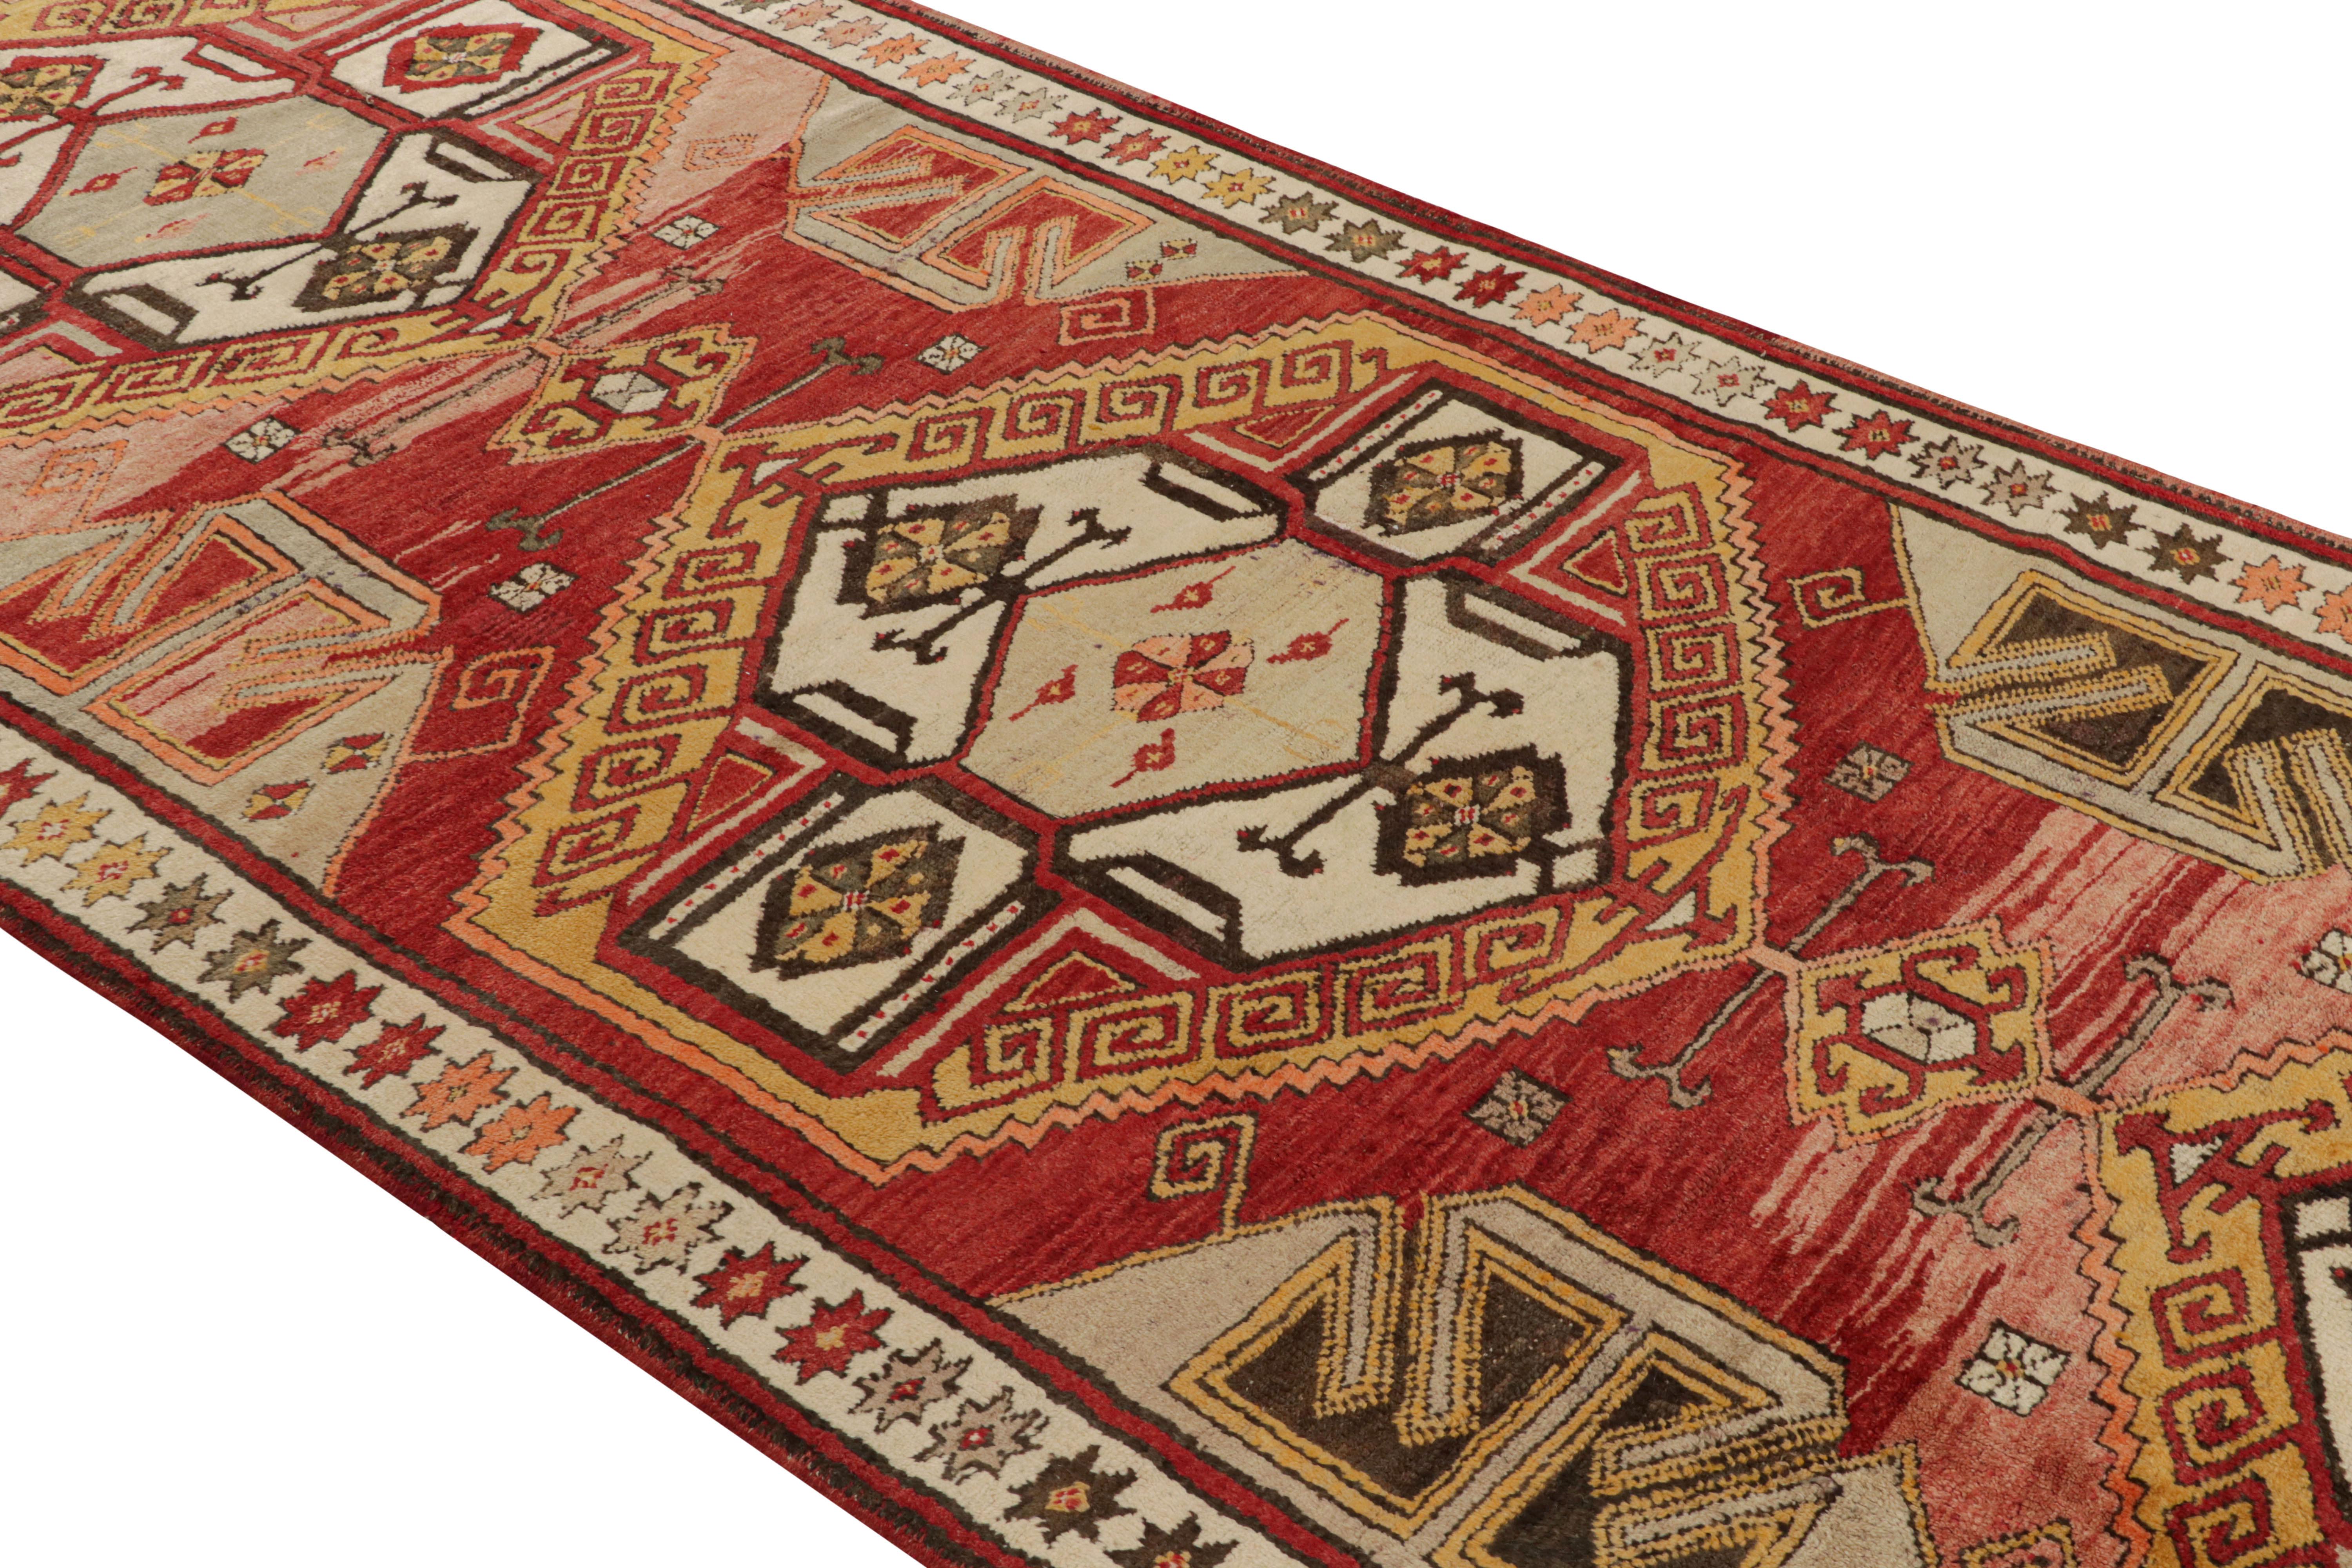 This hand knotted midcentury rug originates from the Konya region of Turkey circa 1950-1960, enjoying an atypical array of pink and red abrashed hues interceding the more Classic medallion patterns. Connoisseurs will note the versatile dimensions of